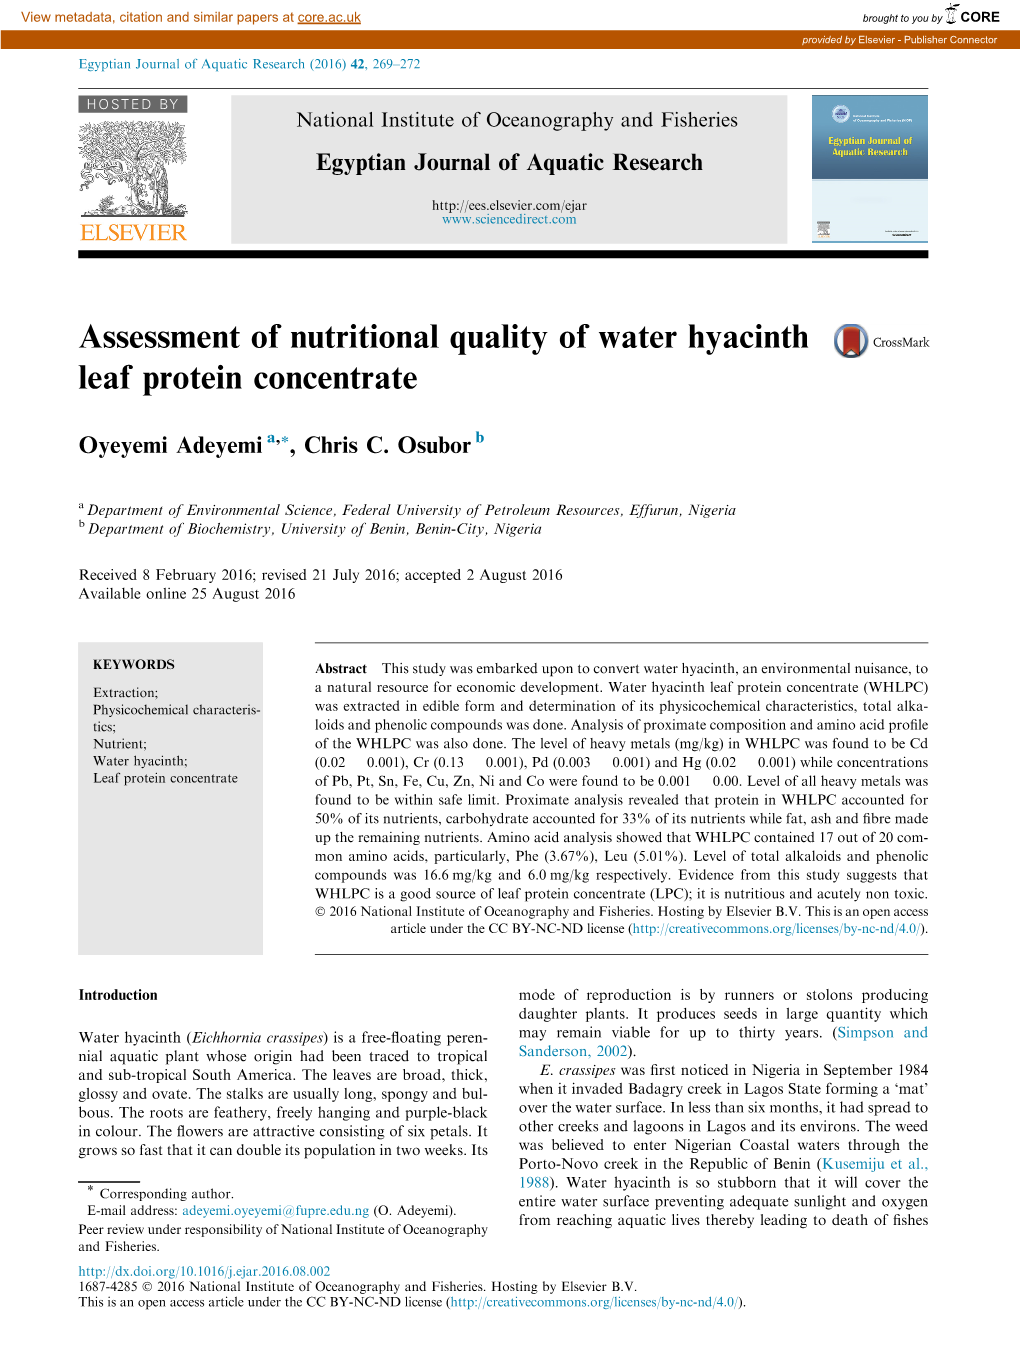 Assessment of Nutritional Quality of Water Hyacinth Leaf Protein Concentrate